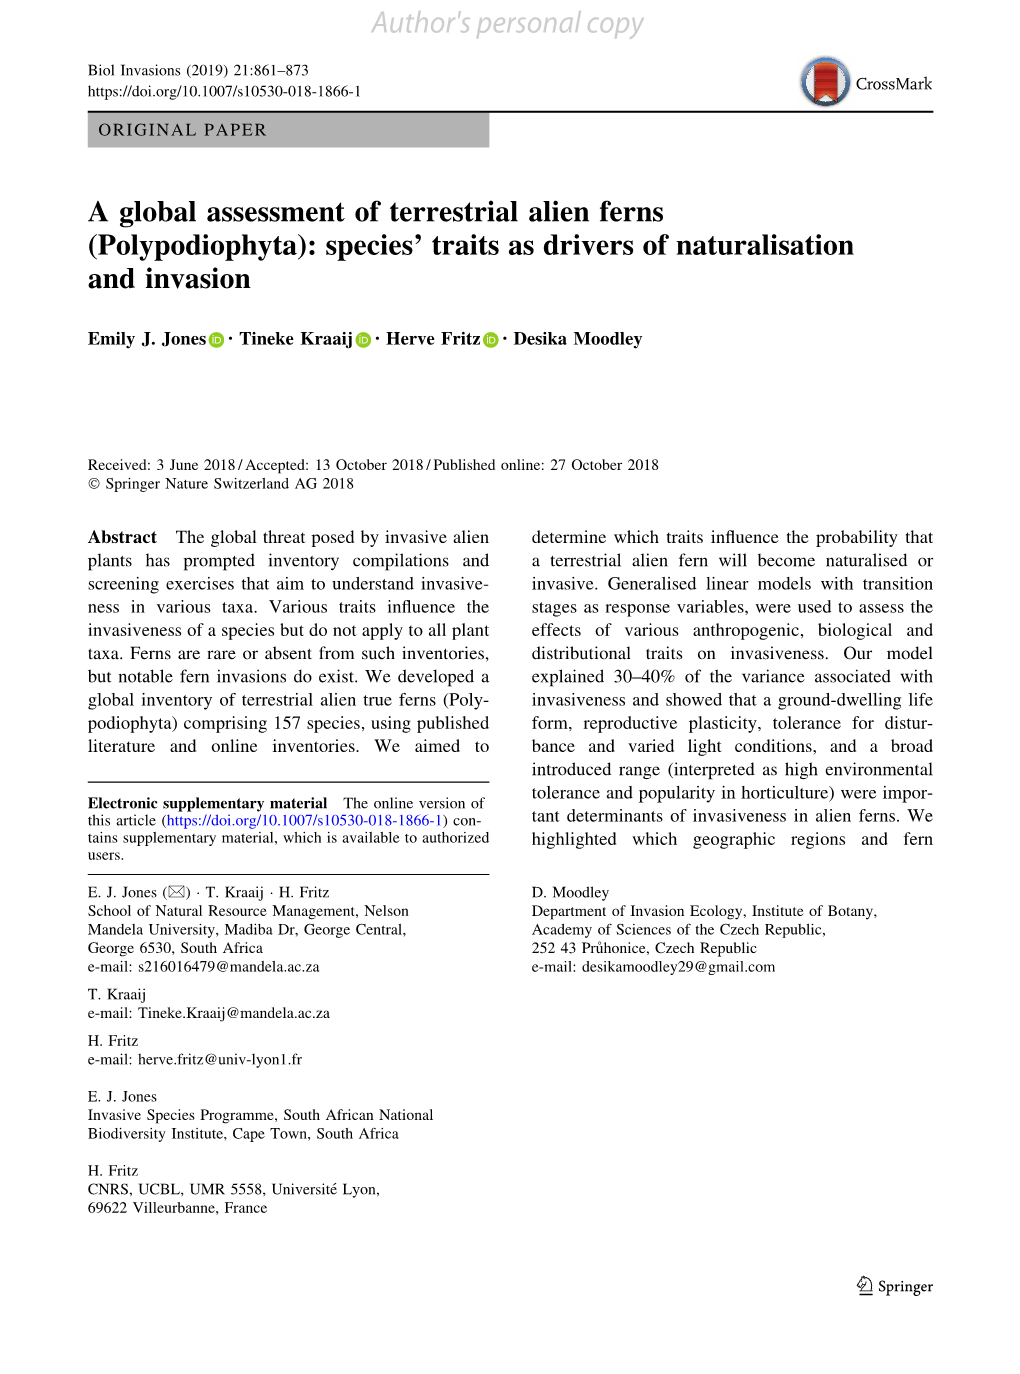 A Global Assessment of Terrestrial Alien Ferns (Polypodiophyta): Species’ Traits As Drivers of Naturalisation and Invasion